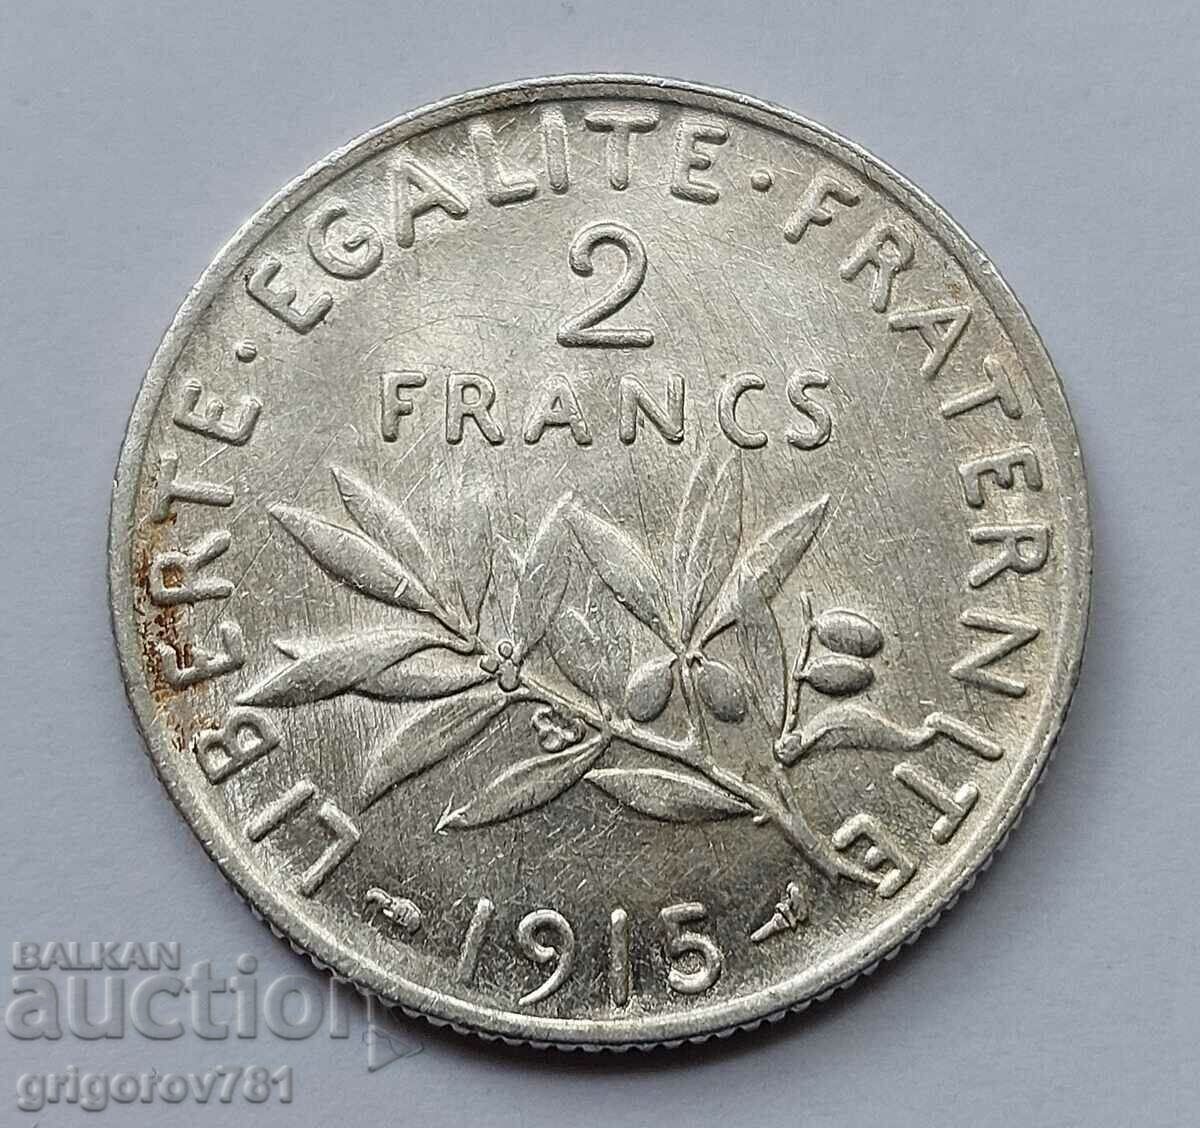 2 Francs Silver France 1915 - Silver Coin #72